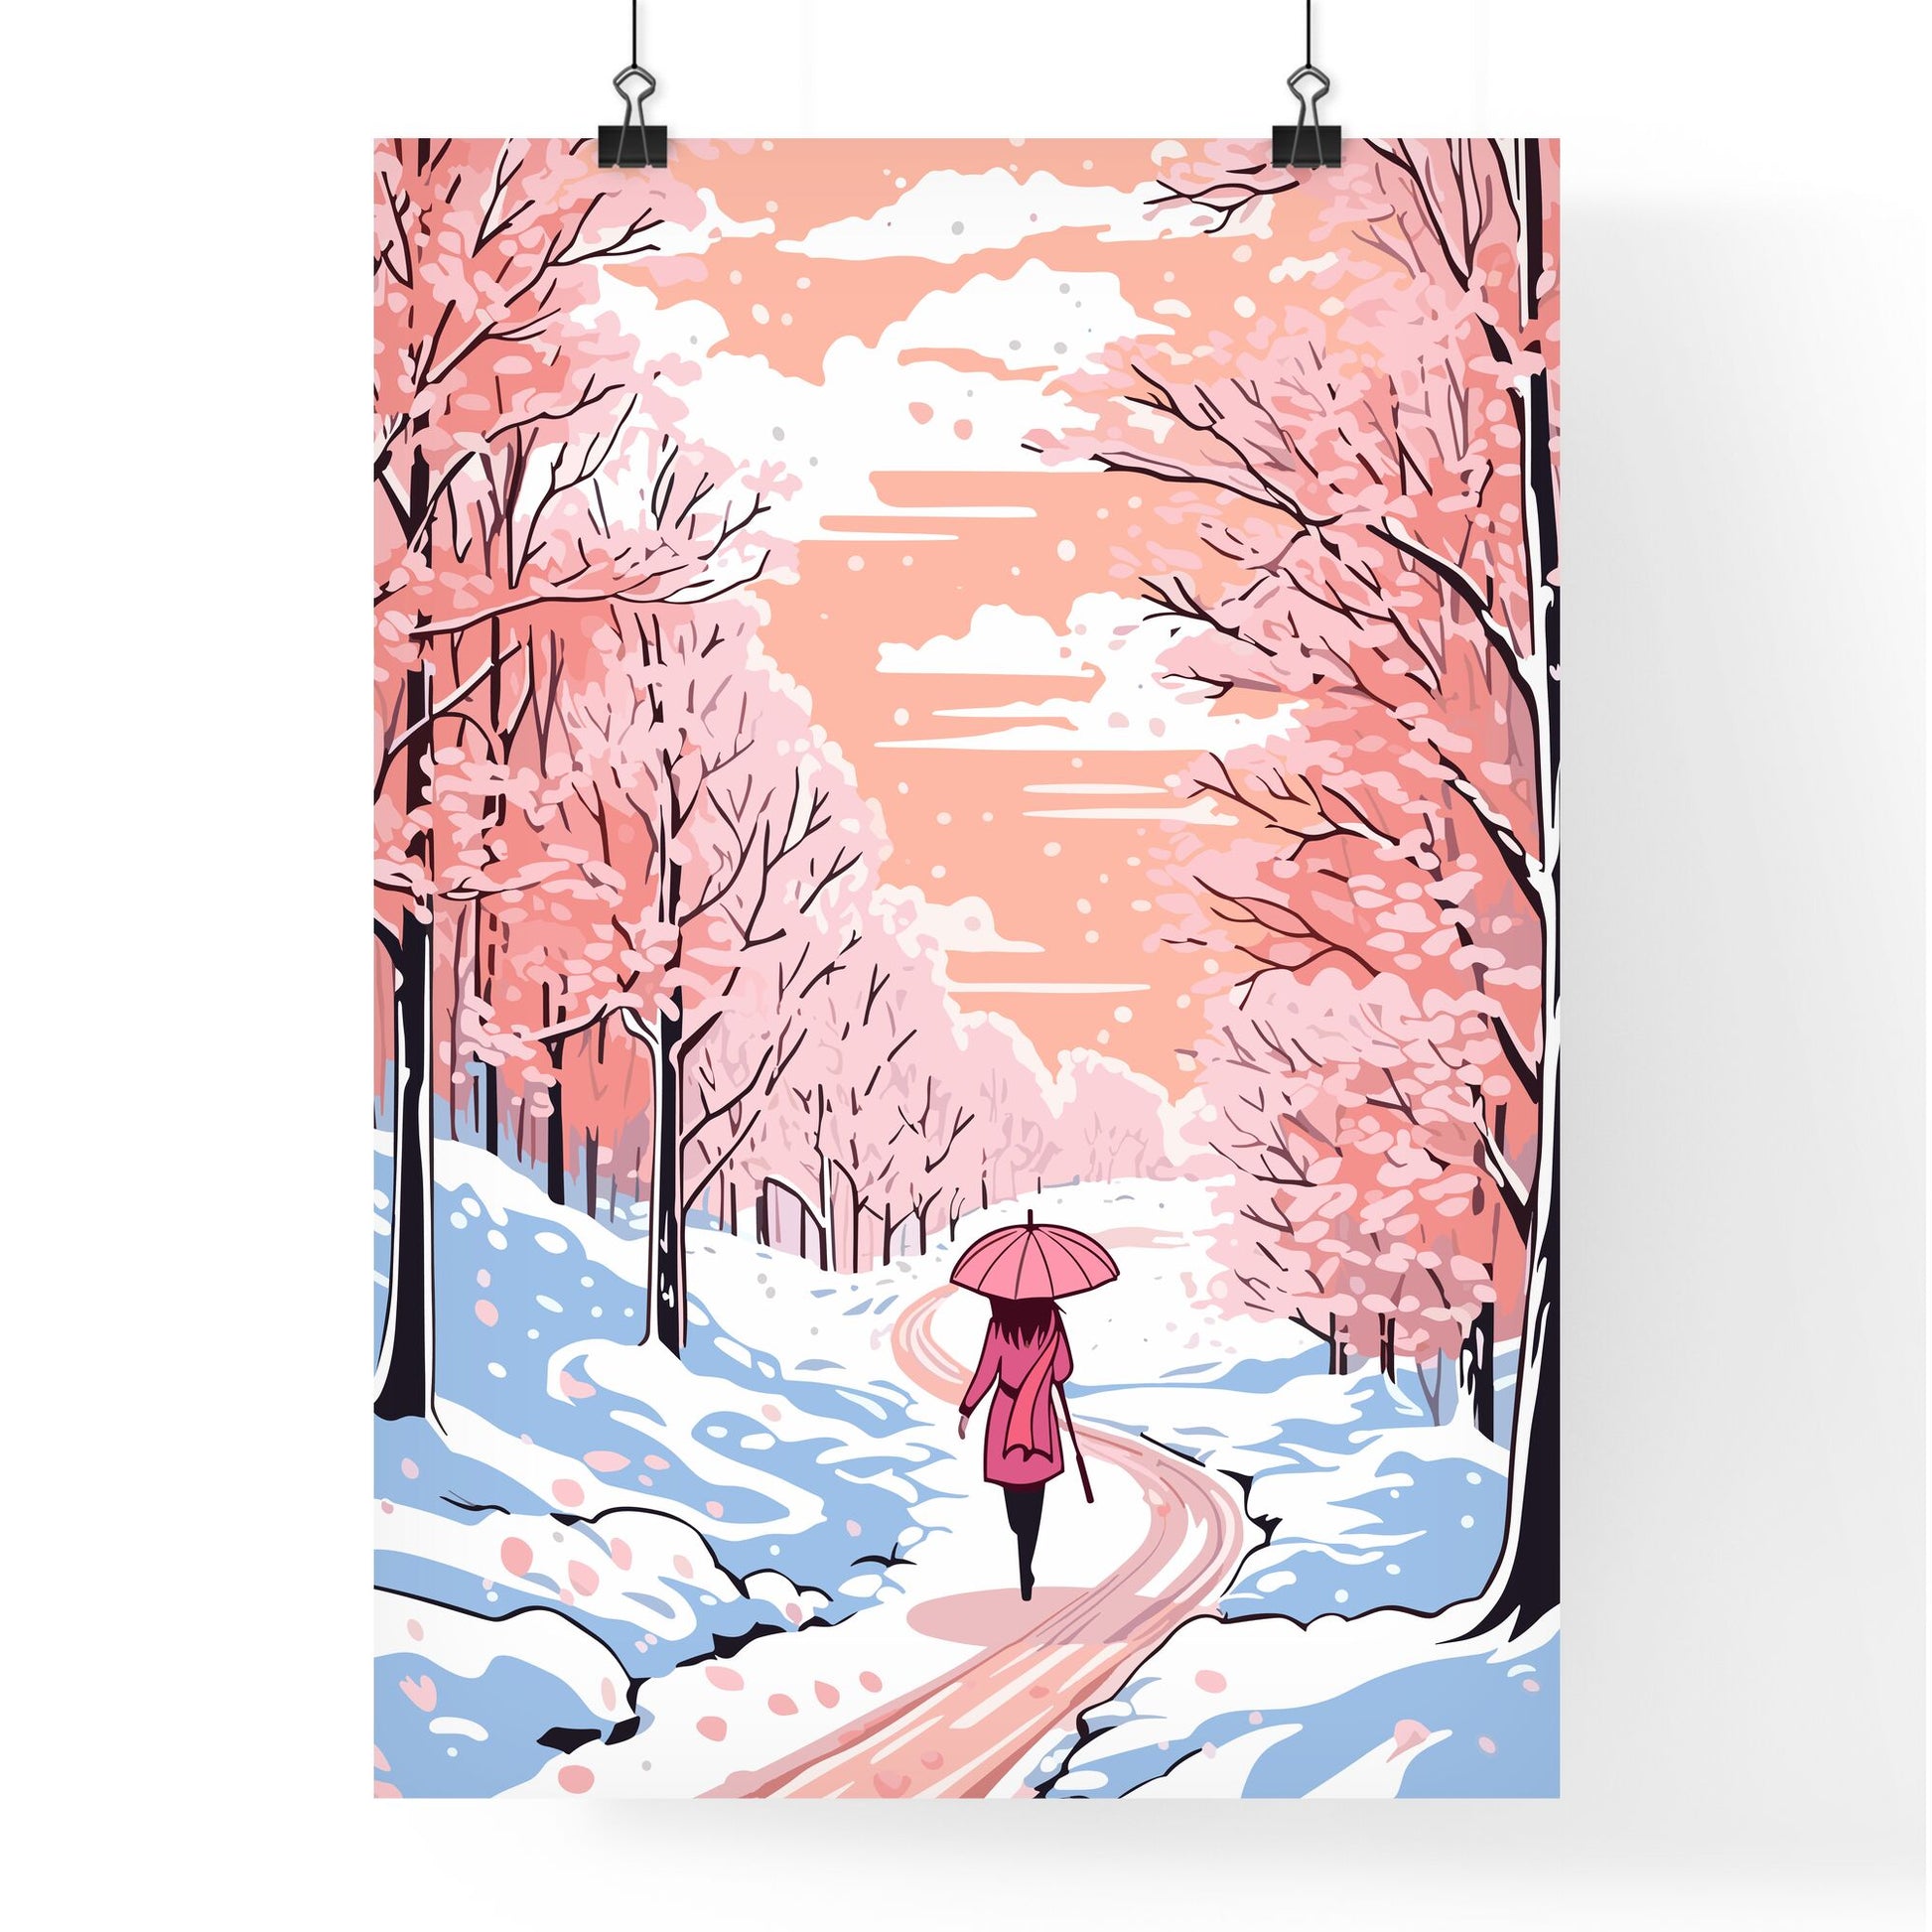 Girl With Umbrella Walking On The Path - A Woman Walking On A Snowy Path With Pink Trees Default Title